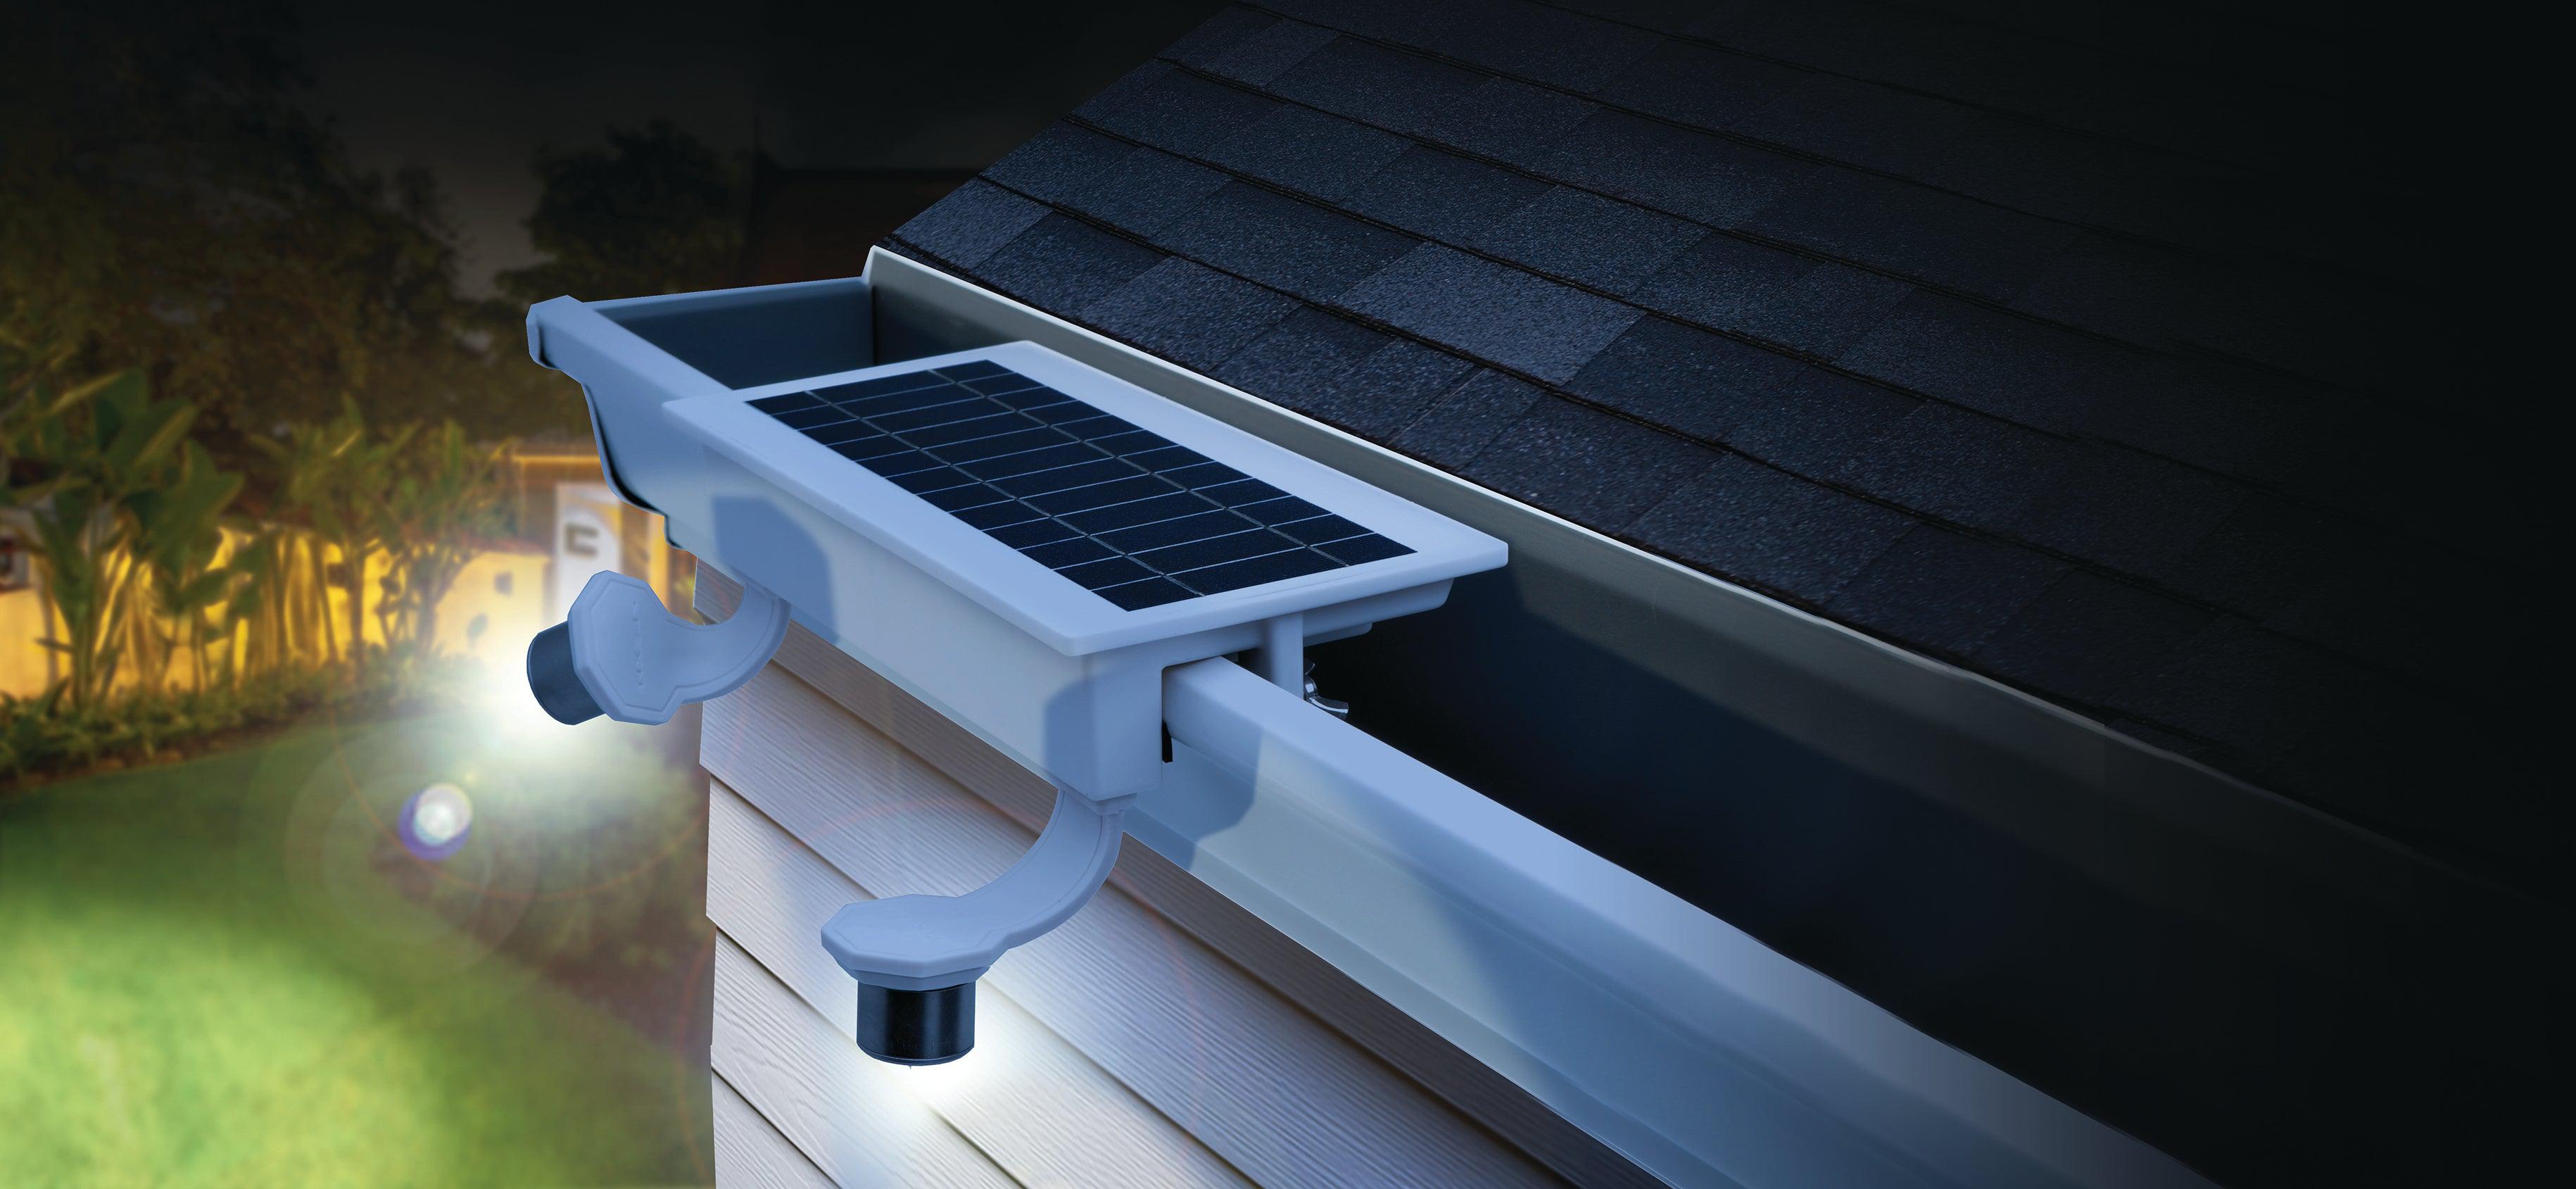 EZ Home Security FLEXIT SpotLight mounted on a white gutter shown from above with a lit up yard below